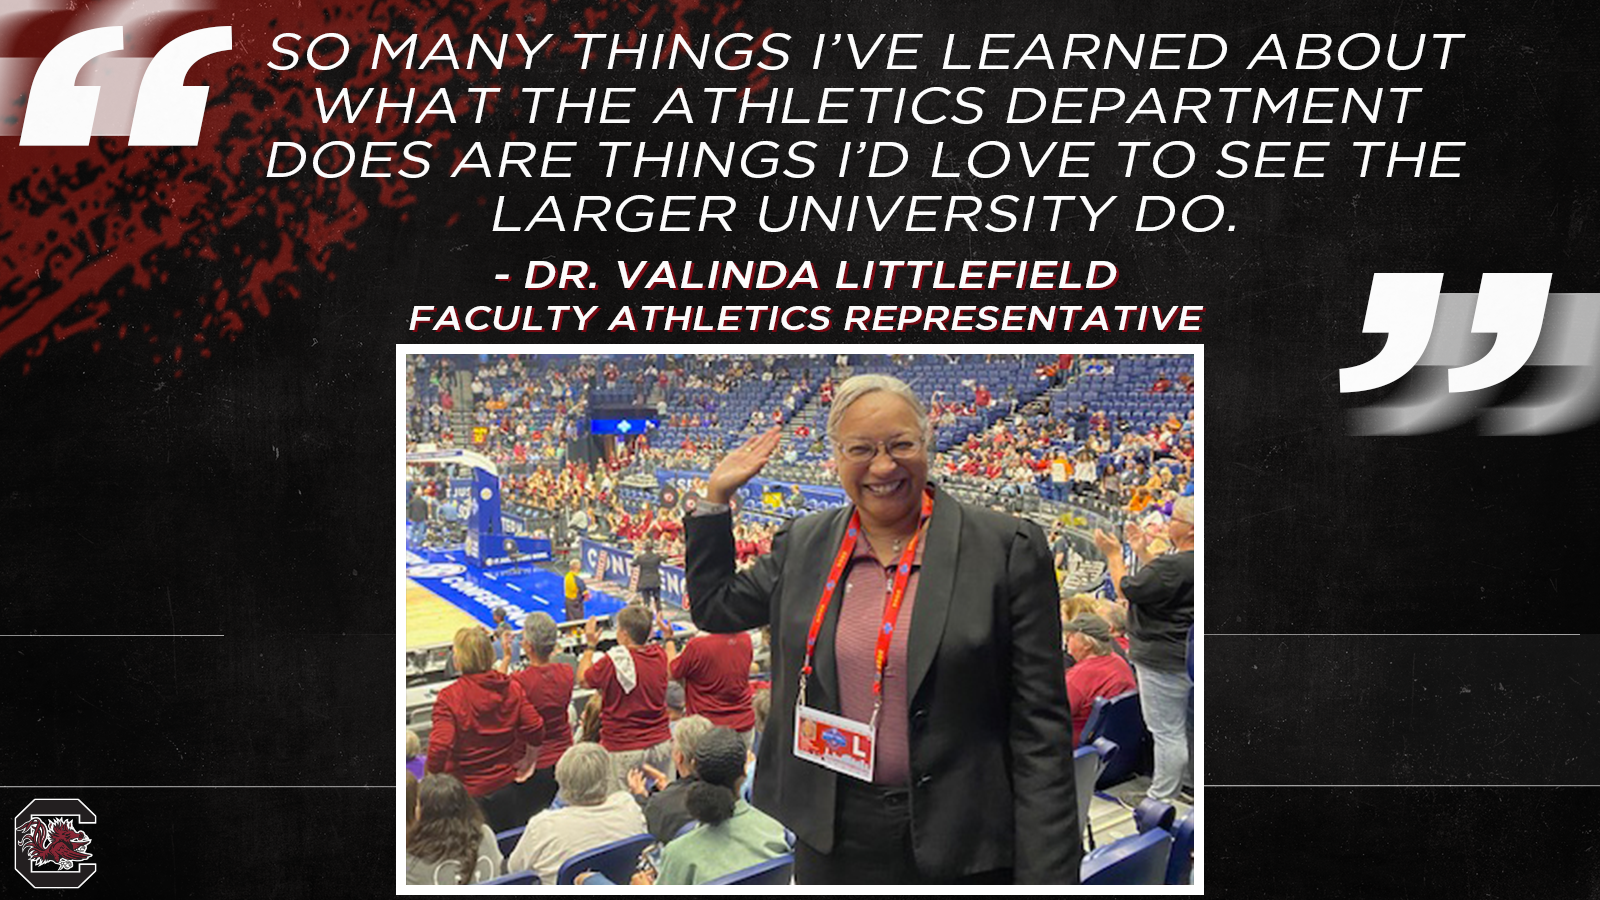 Dr. Valinda Littlefield Makes an Impact for Athletics Outside the Arena